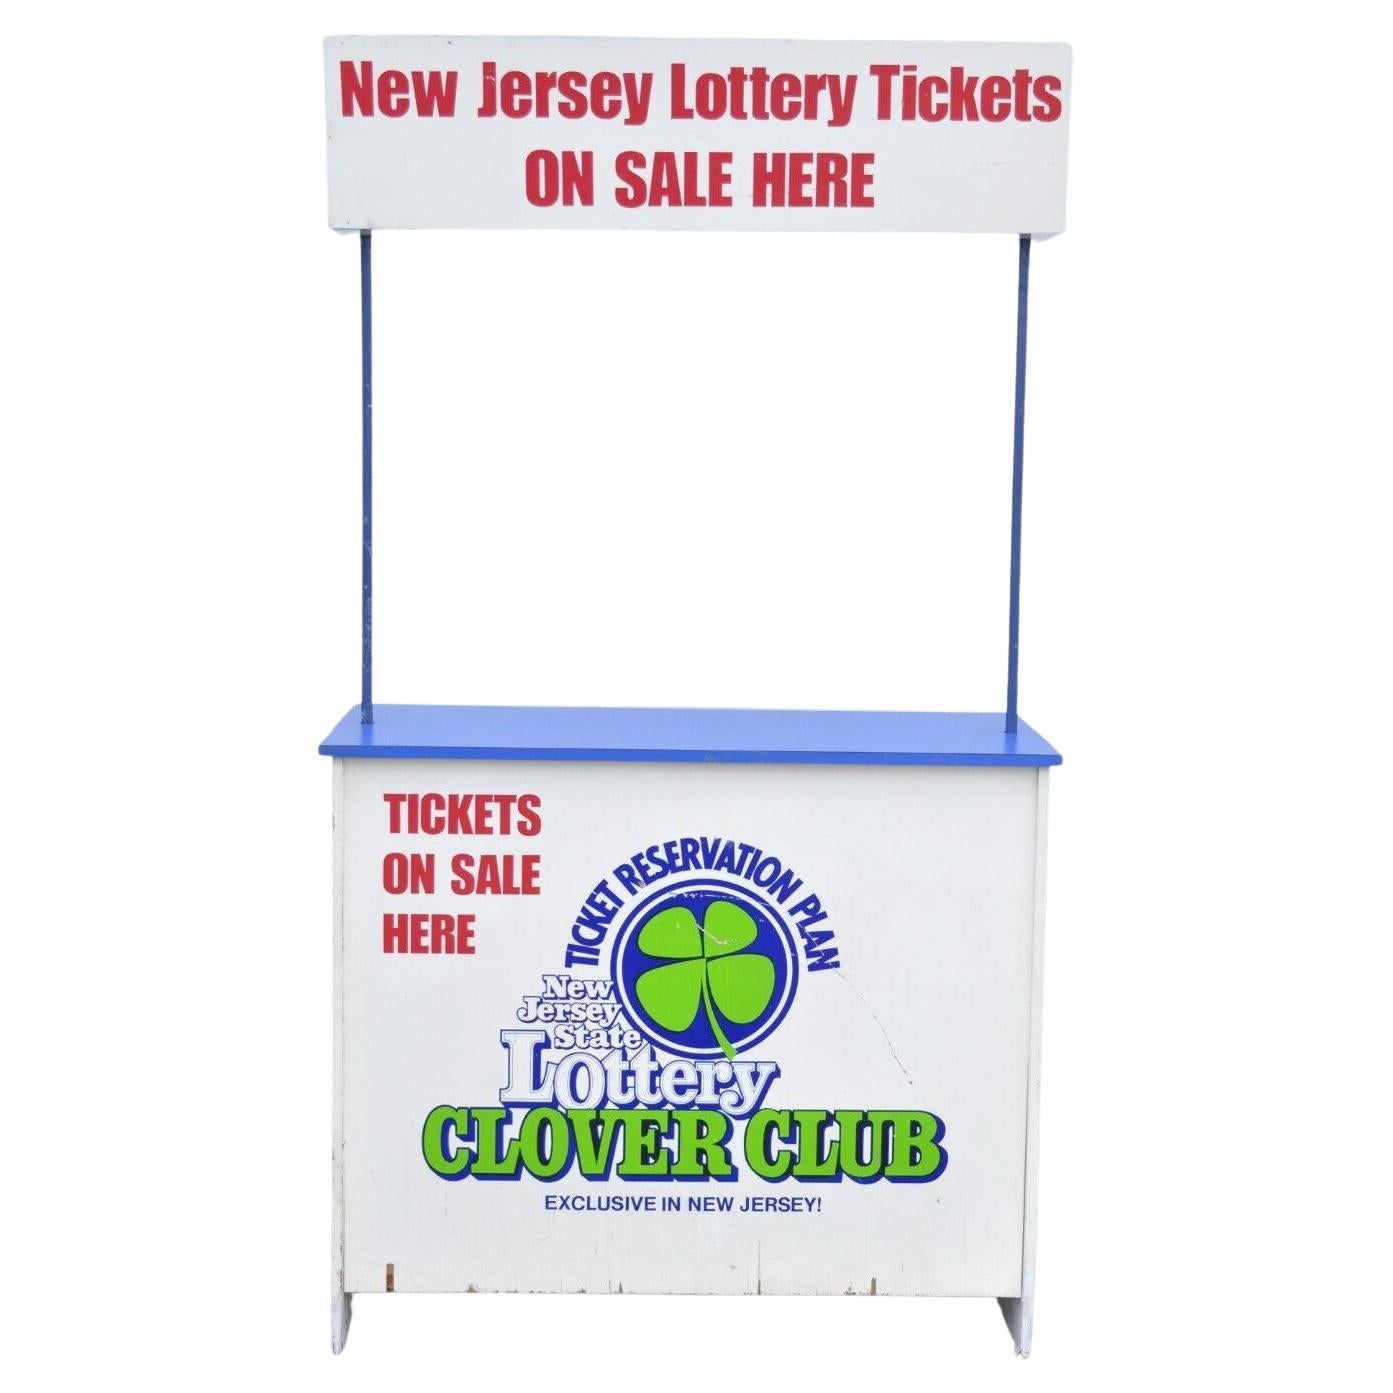 New Jersey Lottery Tickets Lottery Clover Club Advertisement Stand Kiosk Counter For Sale